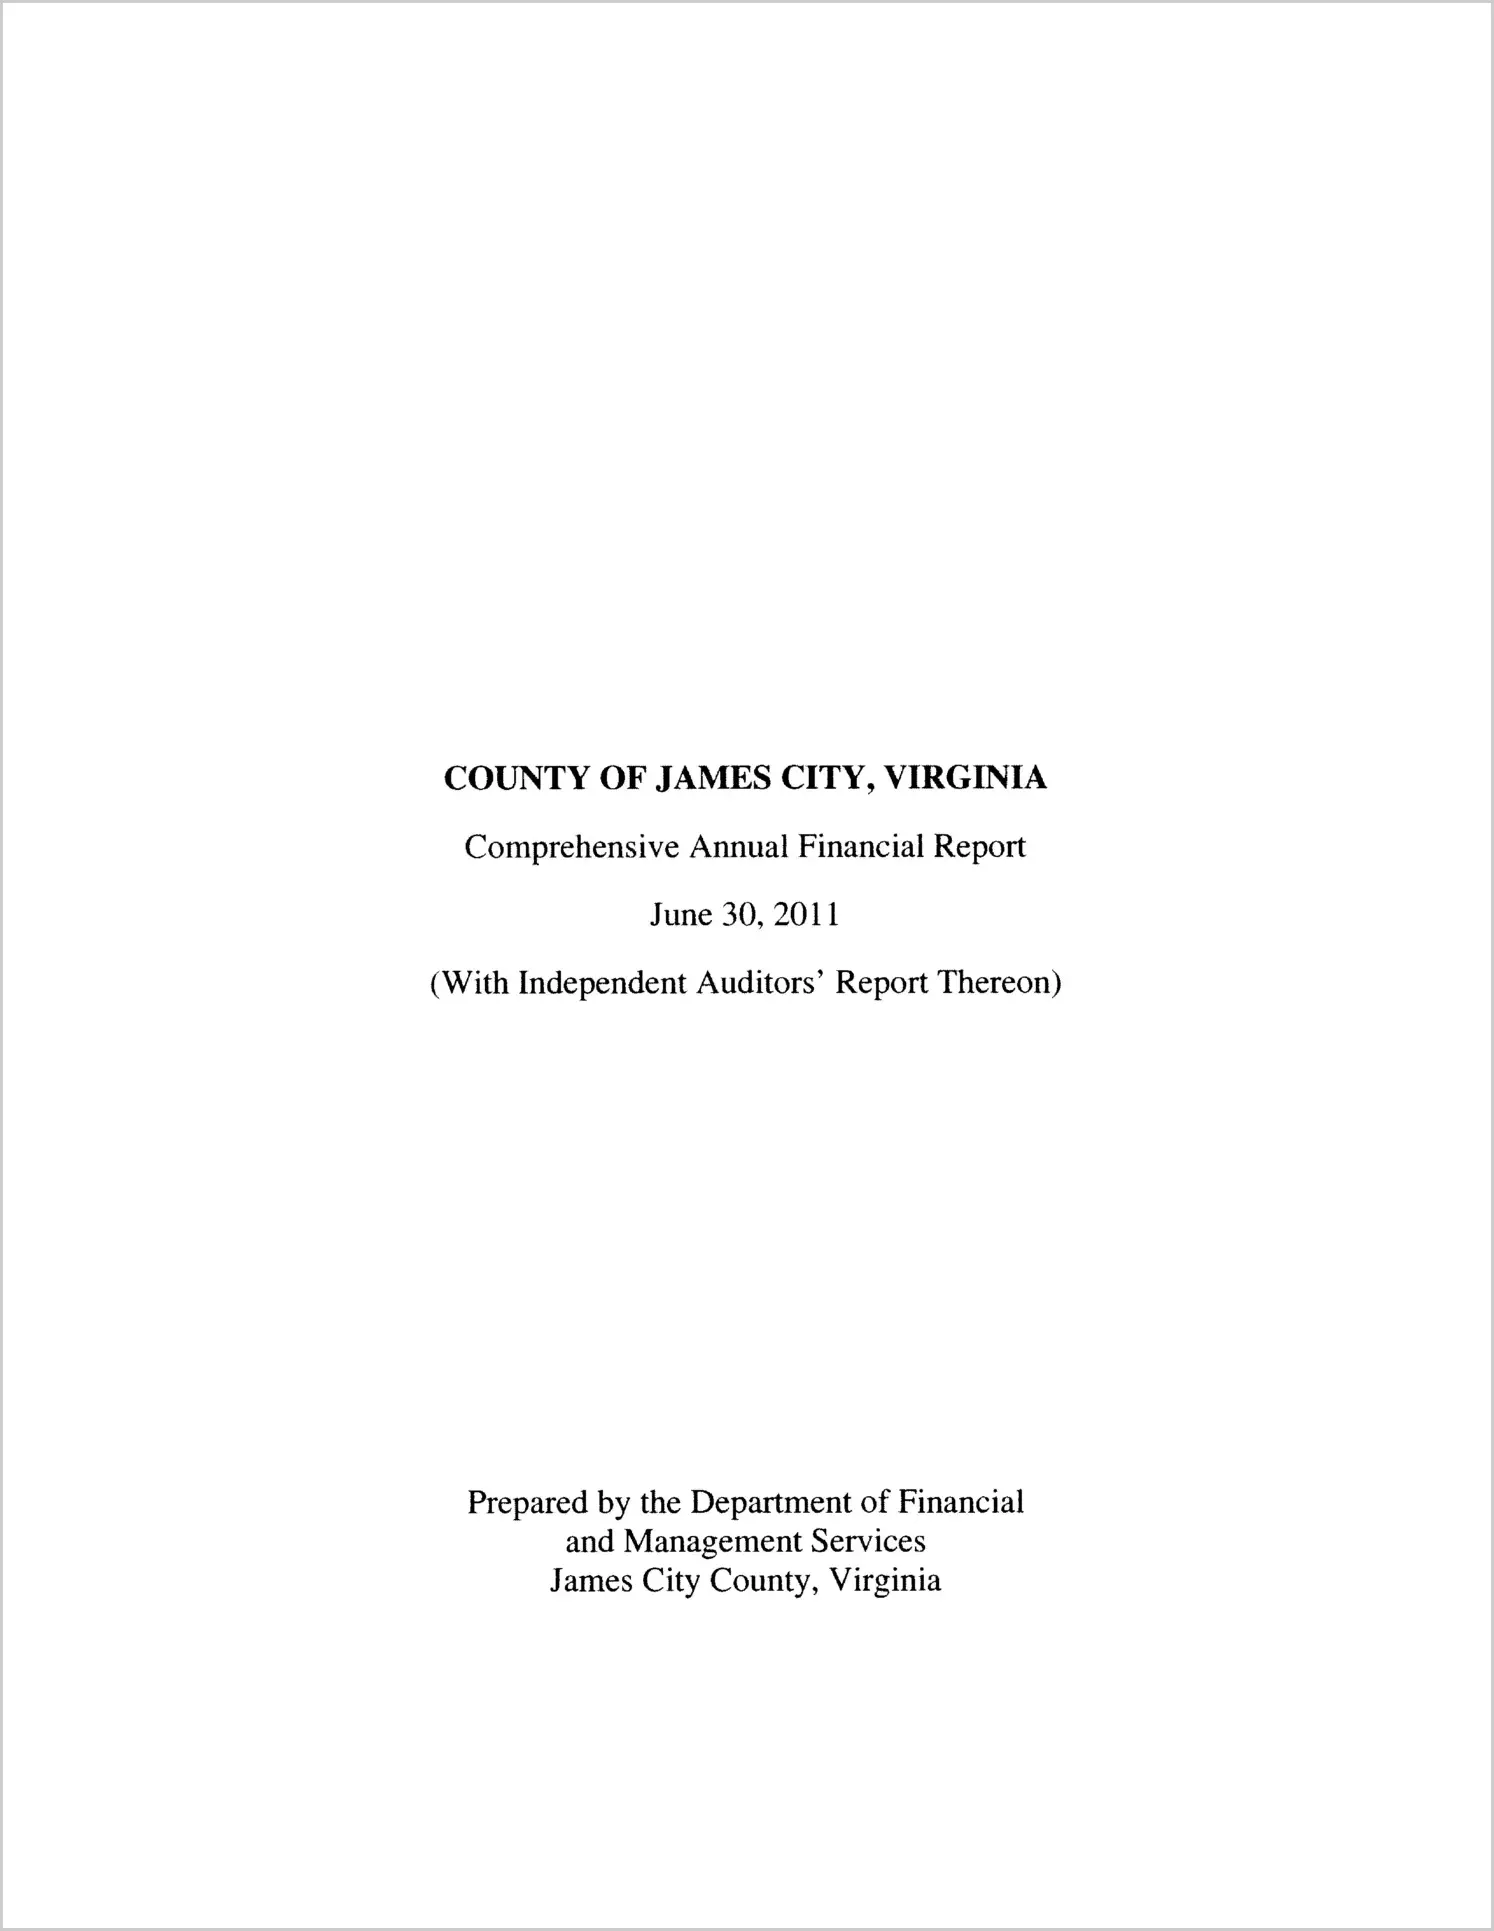 2011 Annual Financial Report for County of James City